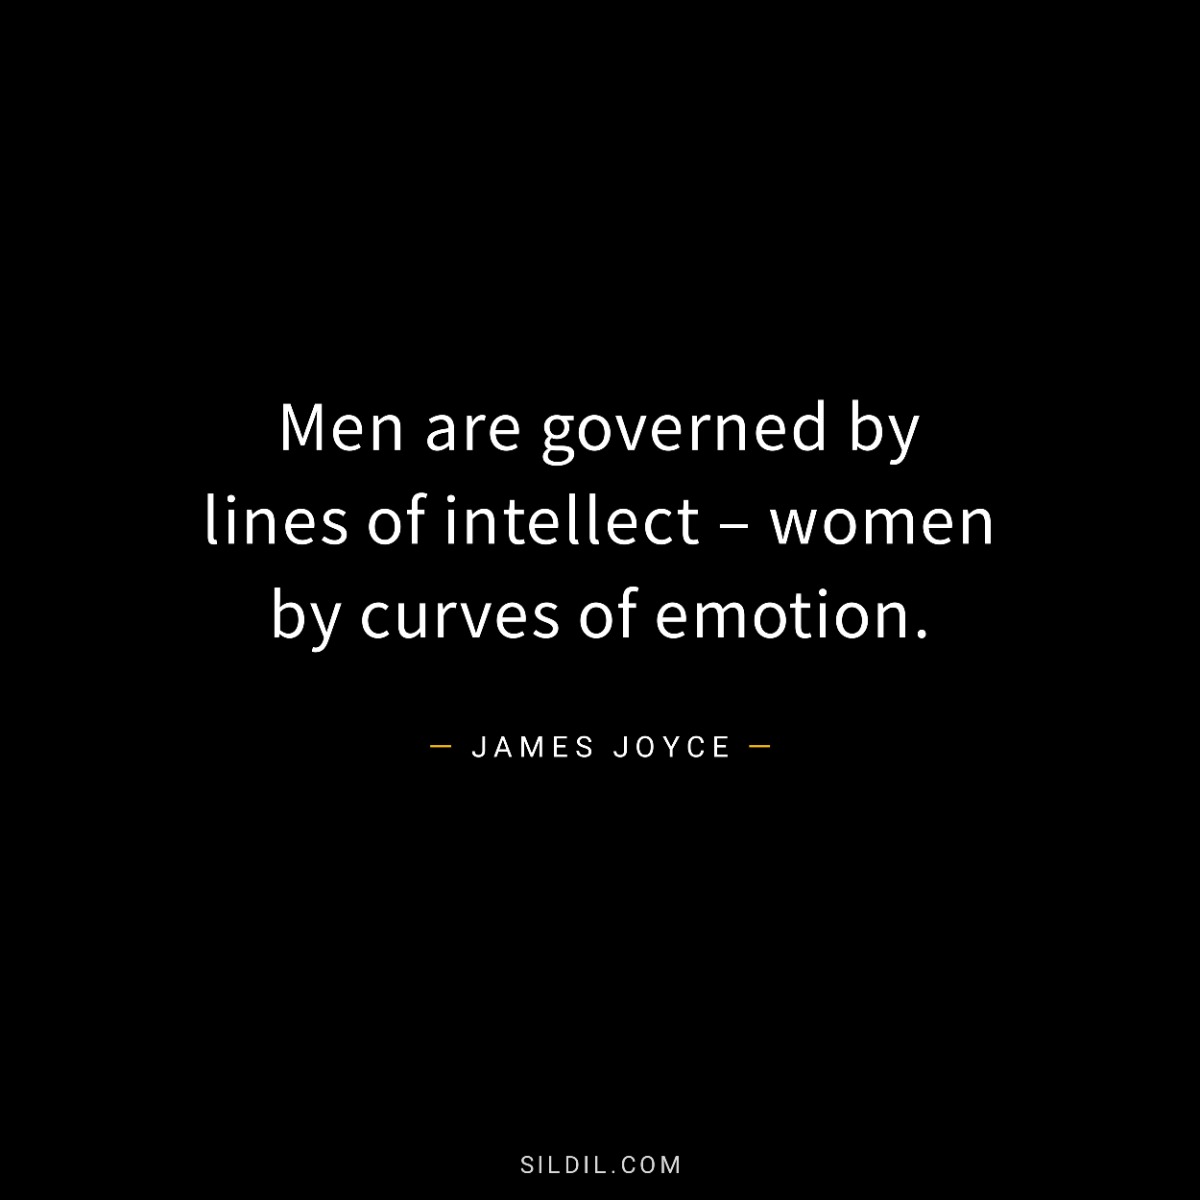 Men are governed by lines of intellect – women by curves of emotion.